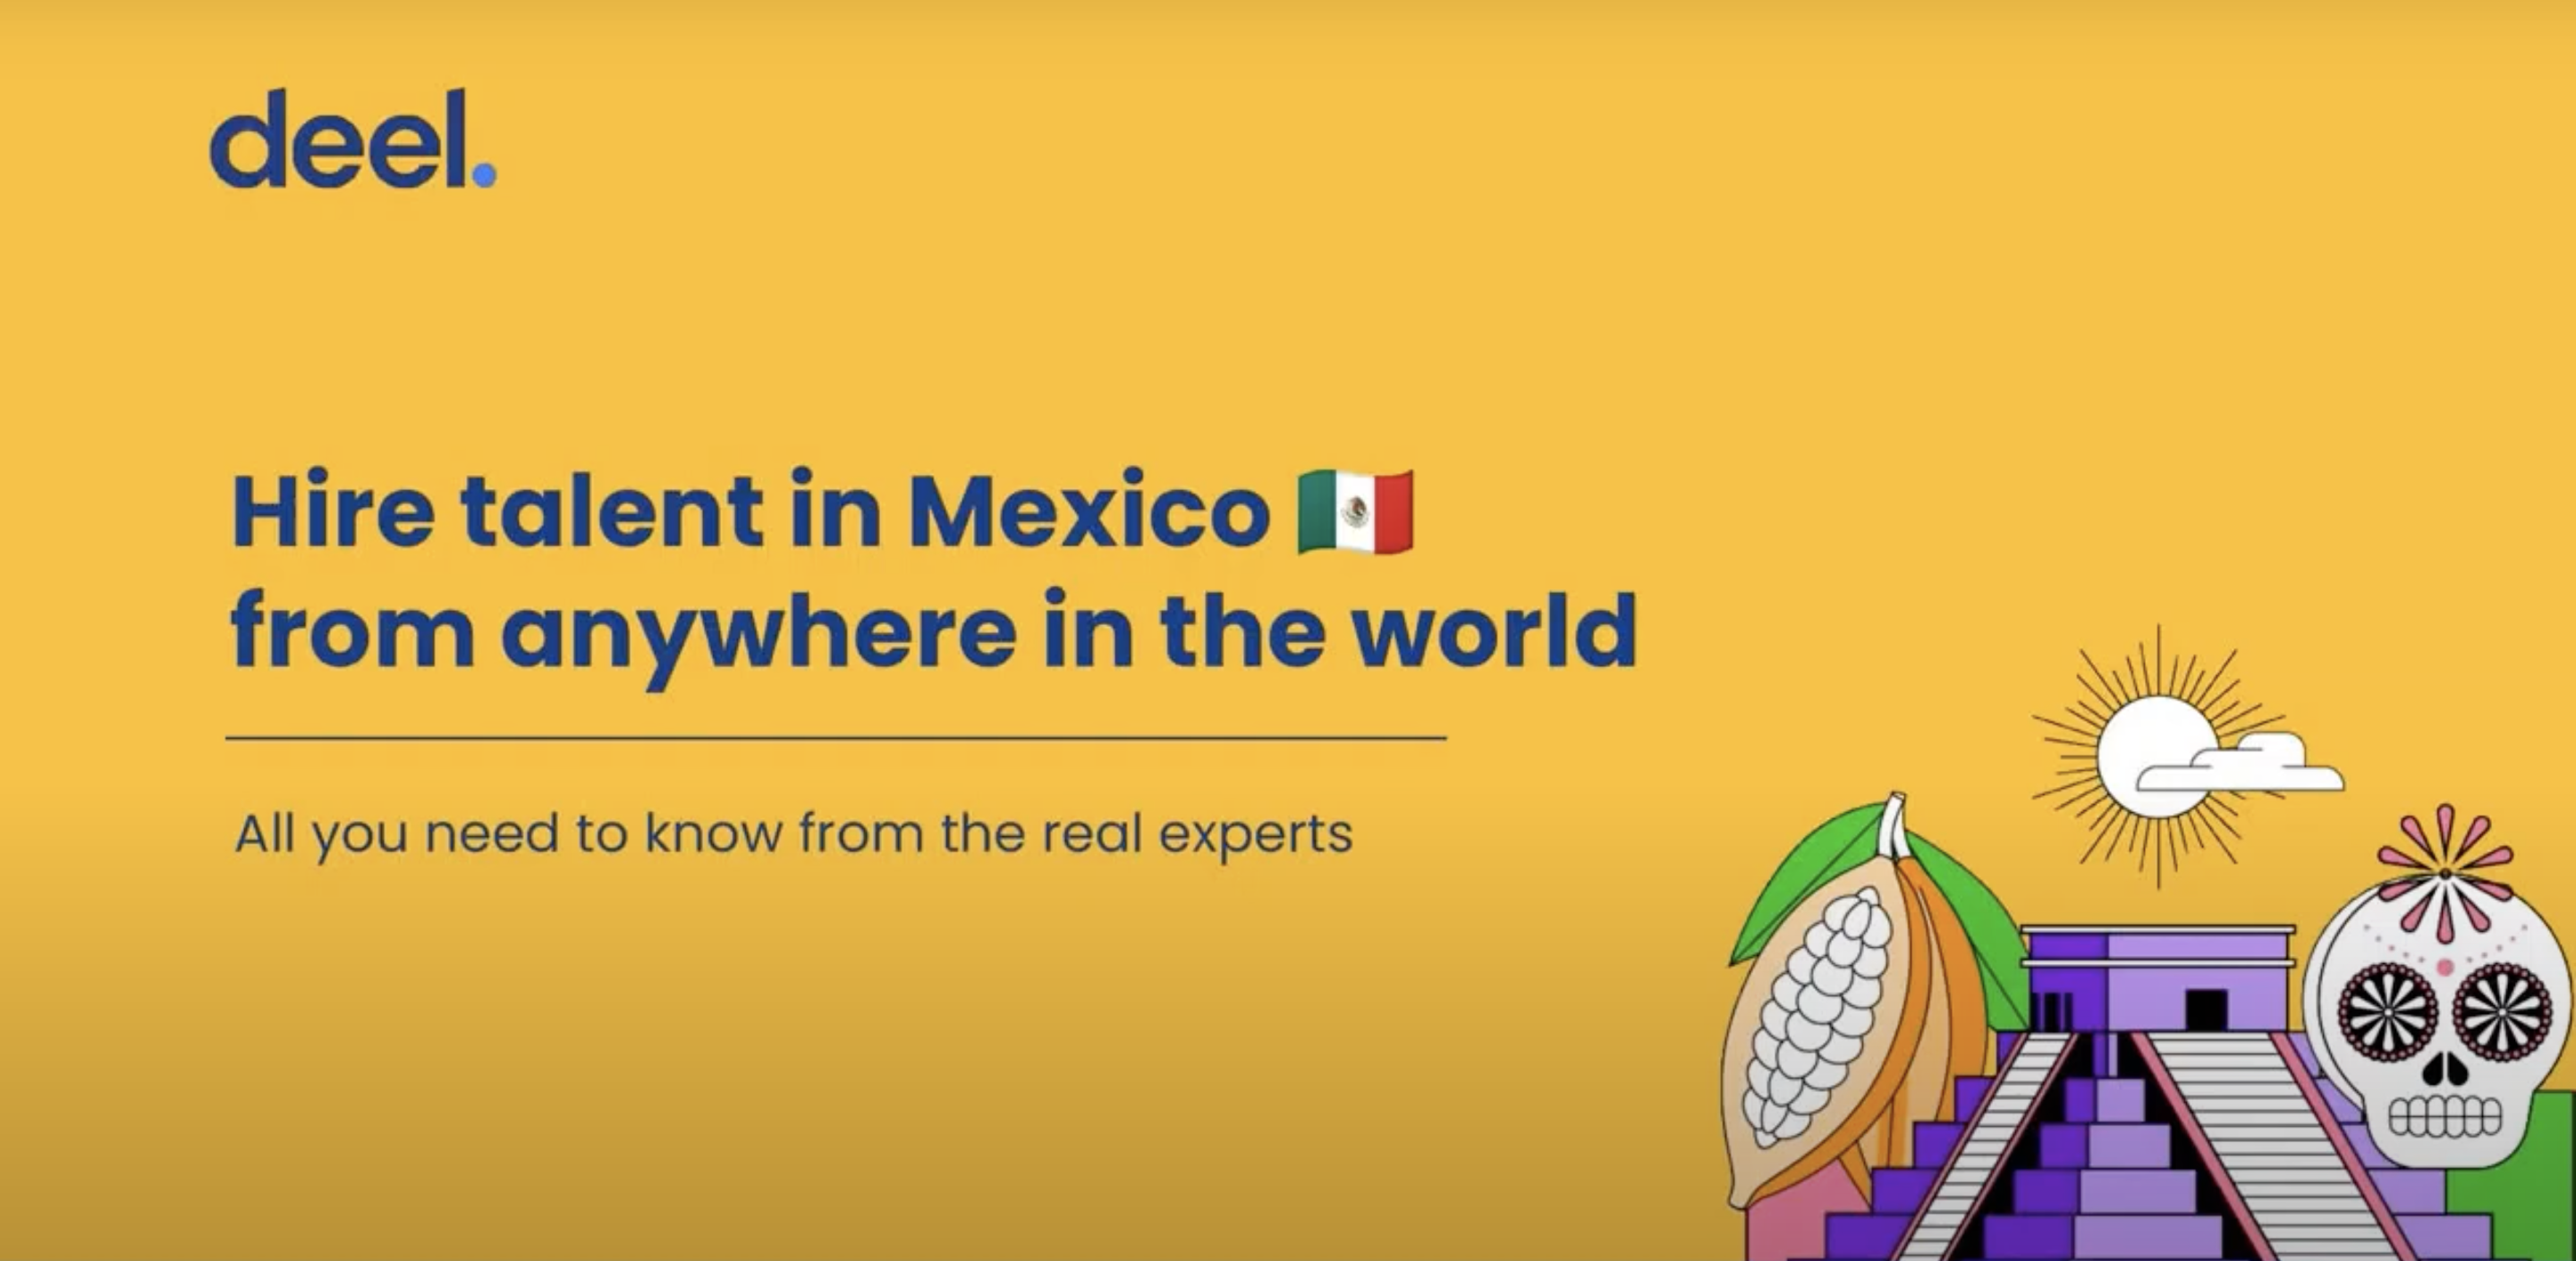 hire talent in mexico